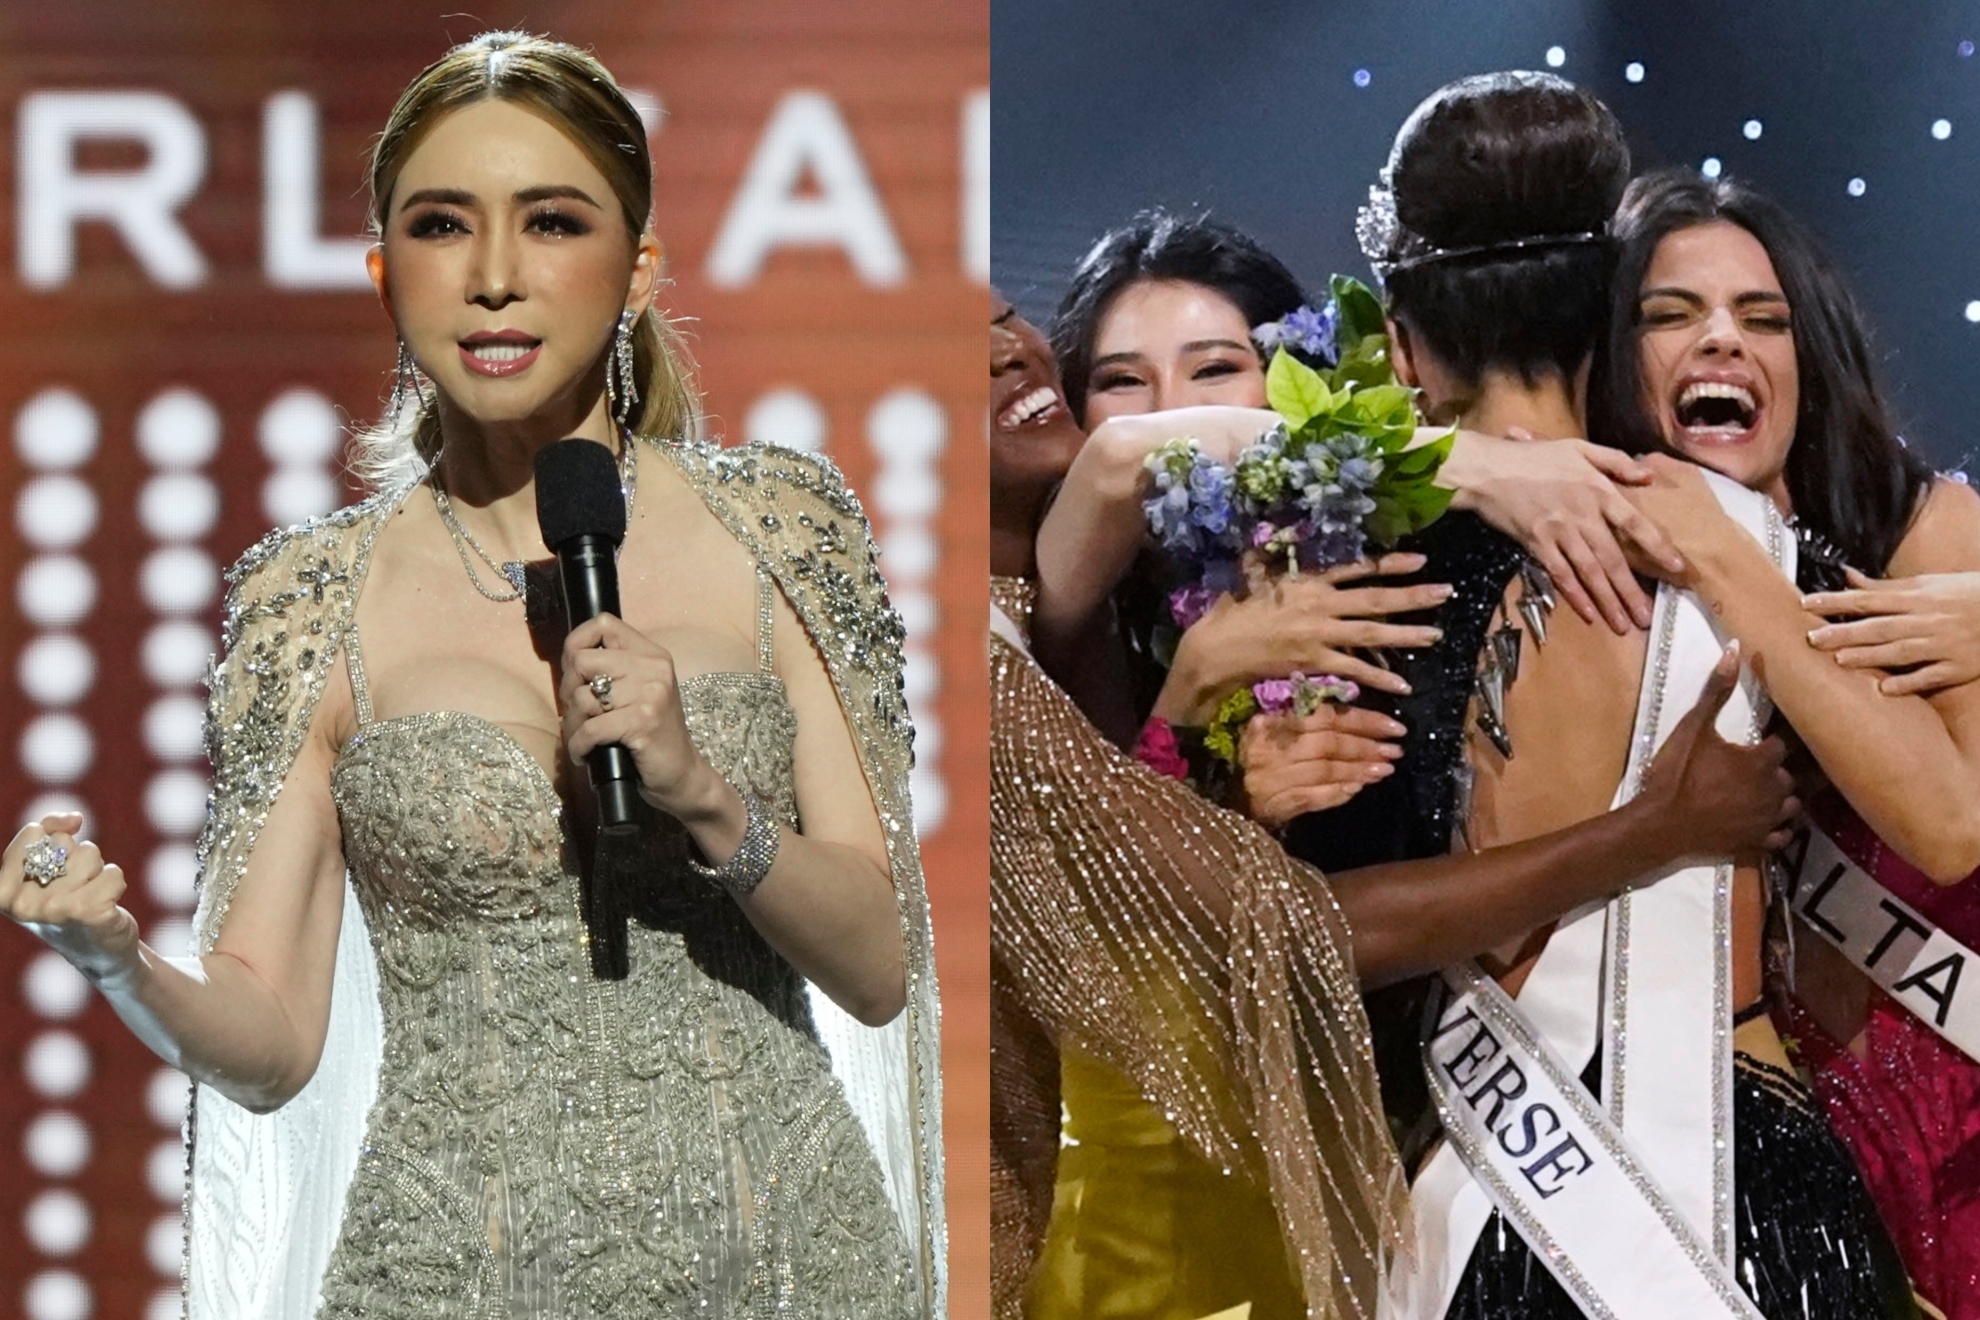 Miss Universe Crown on X: She's stealing everyone else's boobies